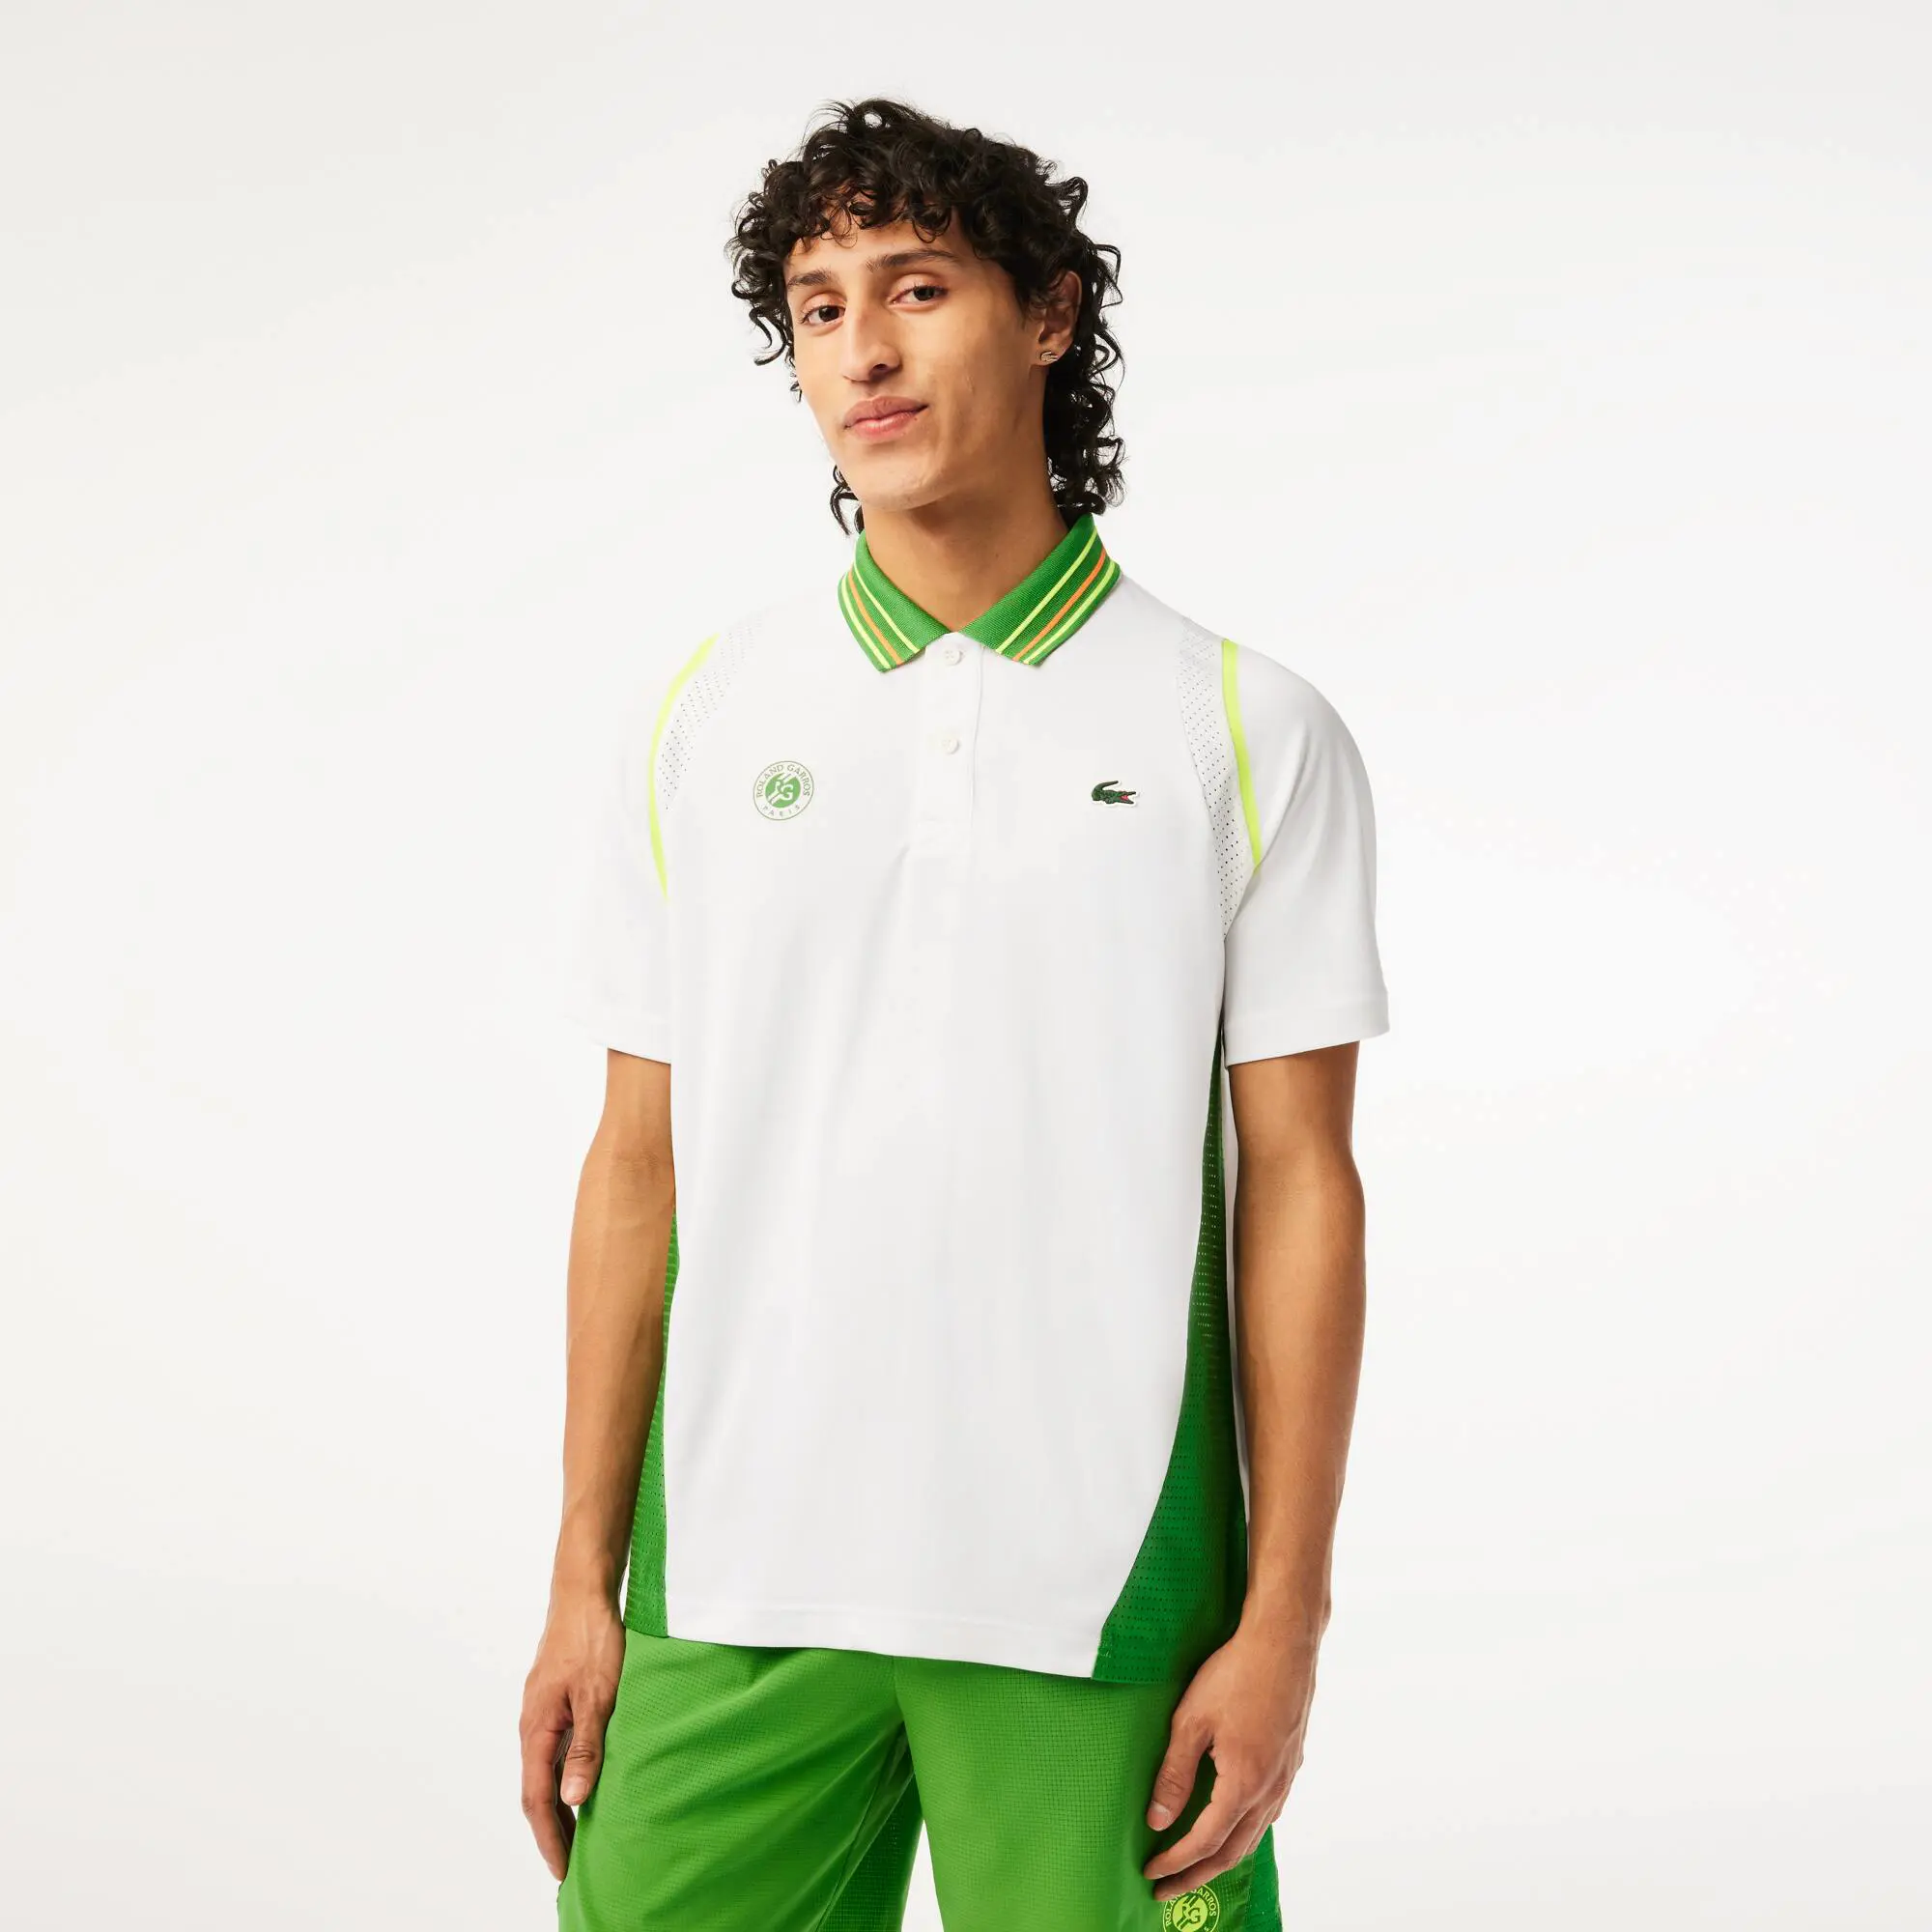 Lacoste Men’s Lacoste Sport Roland Garros Edition Ultra-Dry Two Tone Polo Shirt. 1